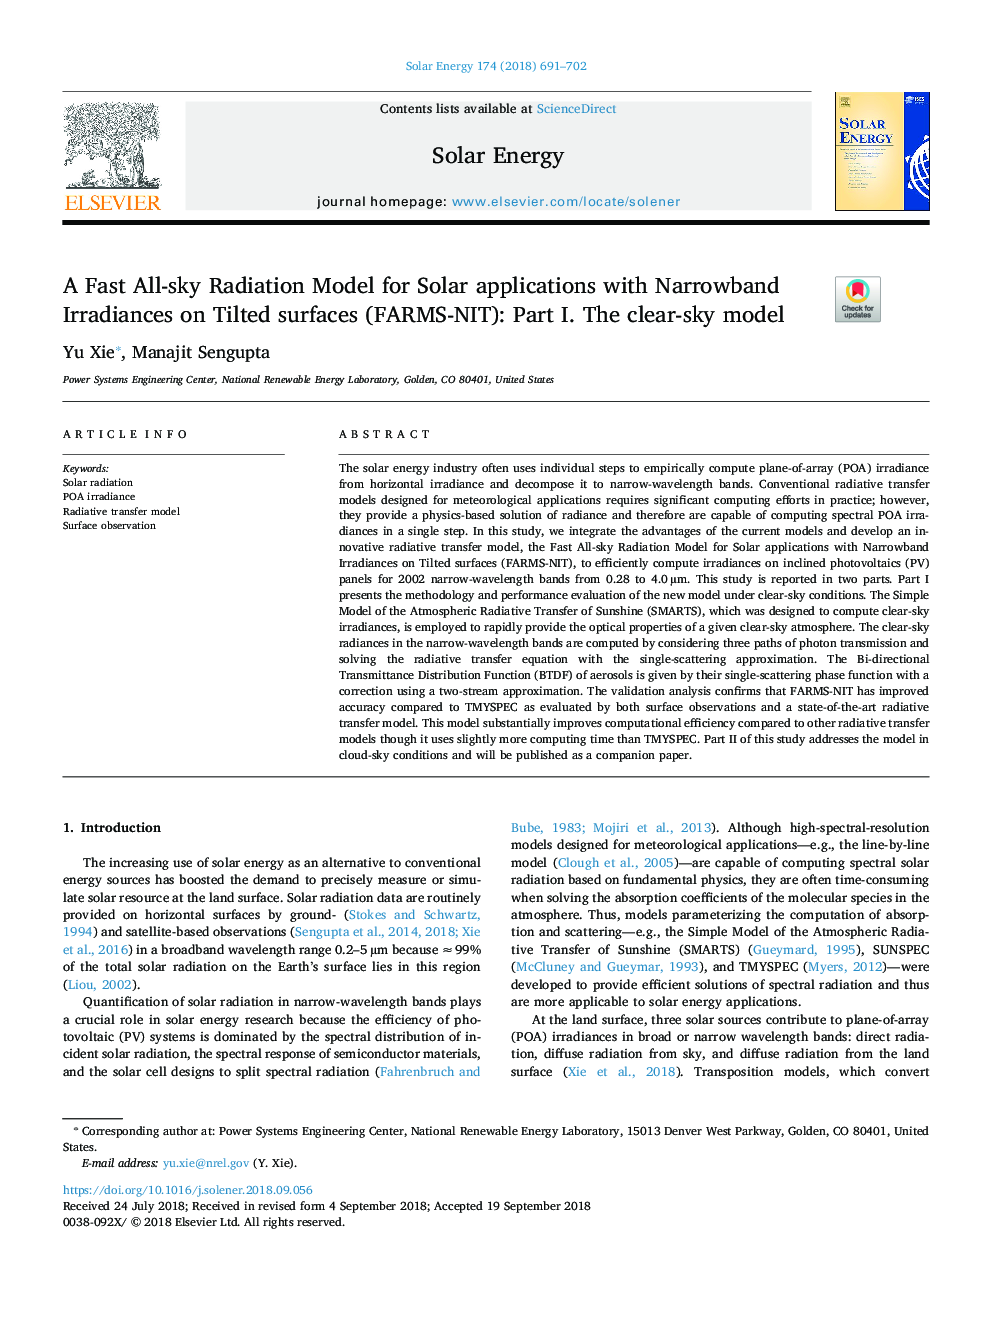 A Fast All-sky Radiation Model for Solar applications with Narrowband Irradiances on Tilted surfaces (FARMS-NIT): Part I. The clear-sky model